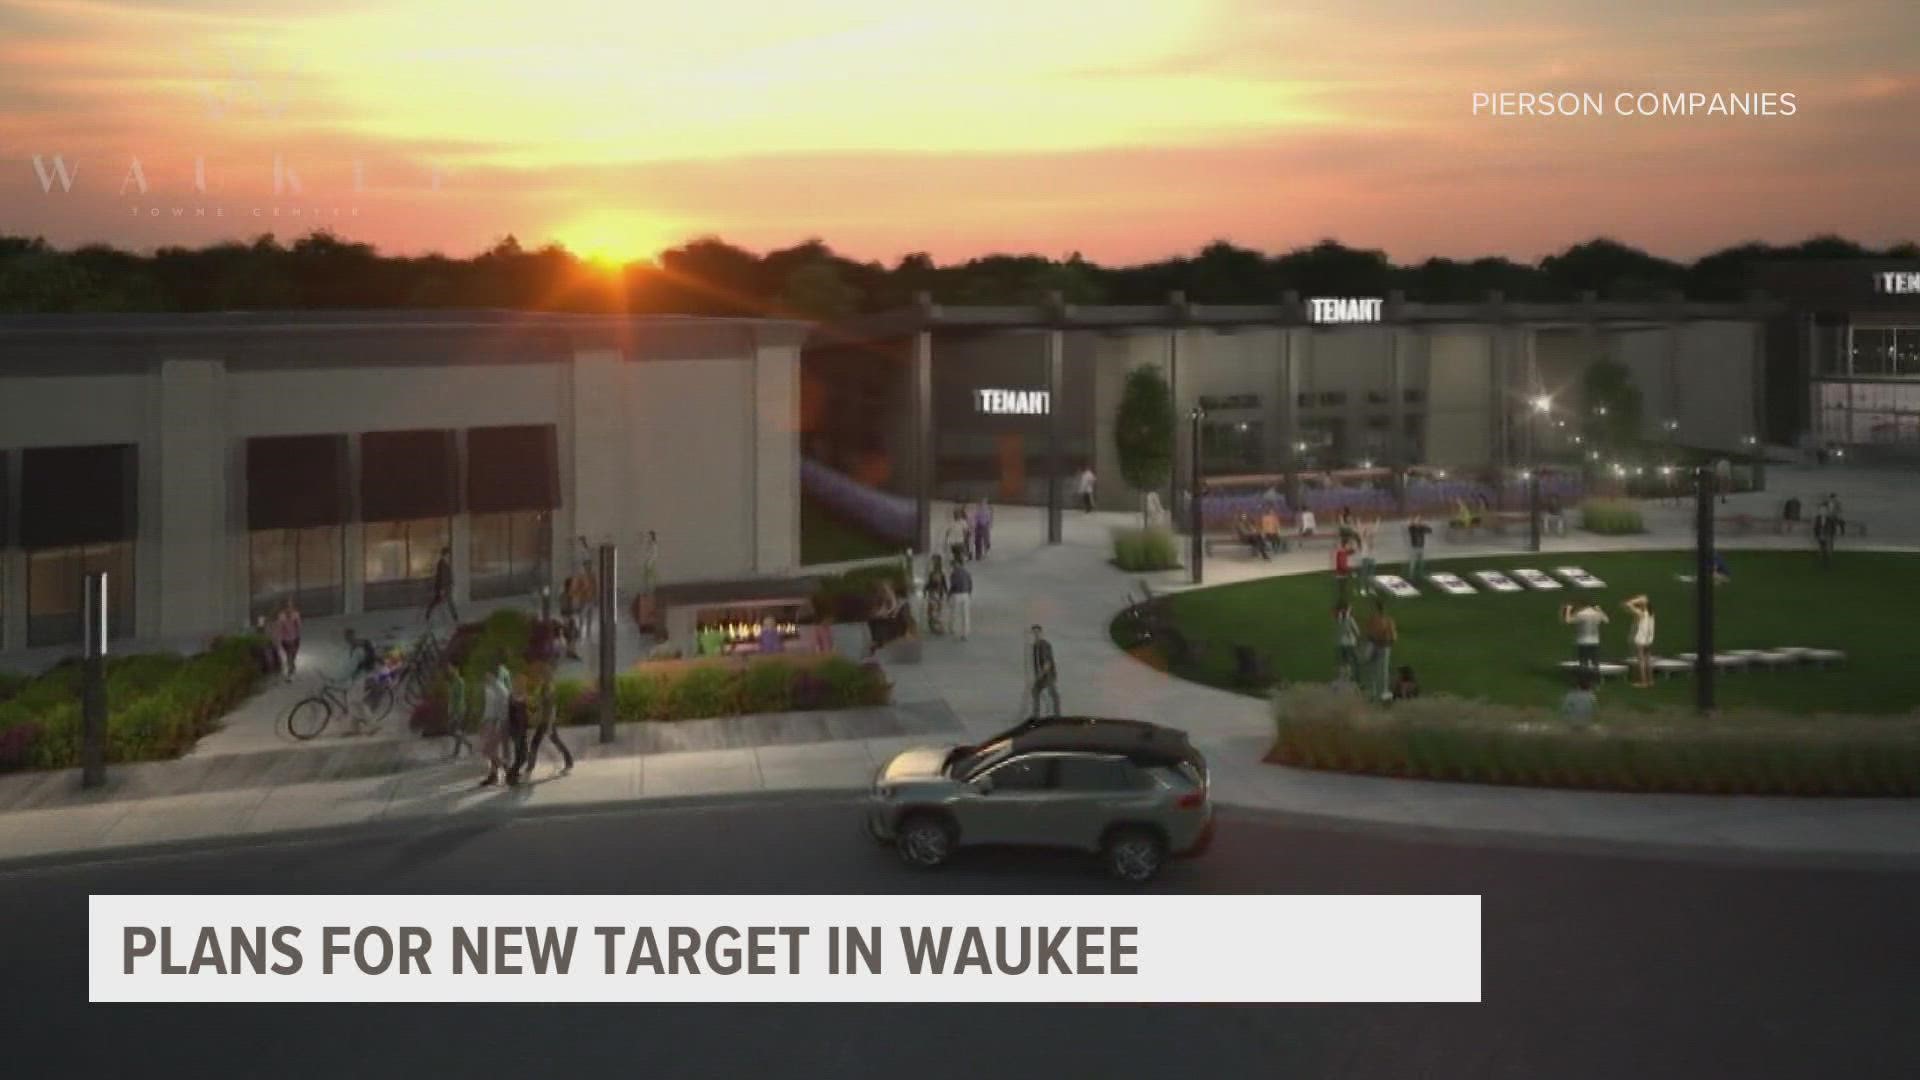 The Target location will be one of many amenities, including restaurants, an ice-skating rink and stores.